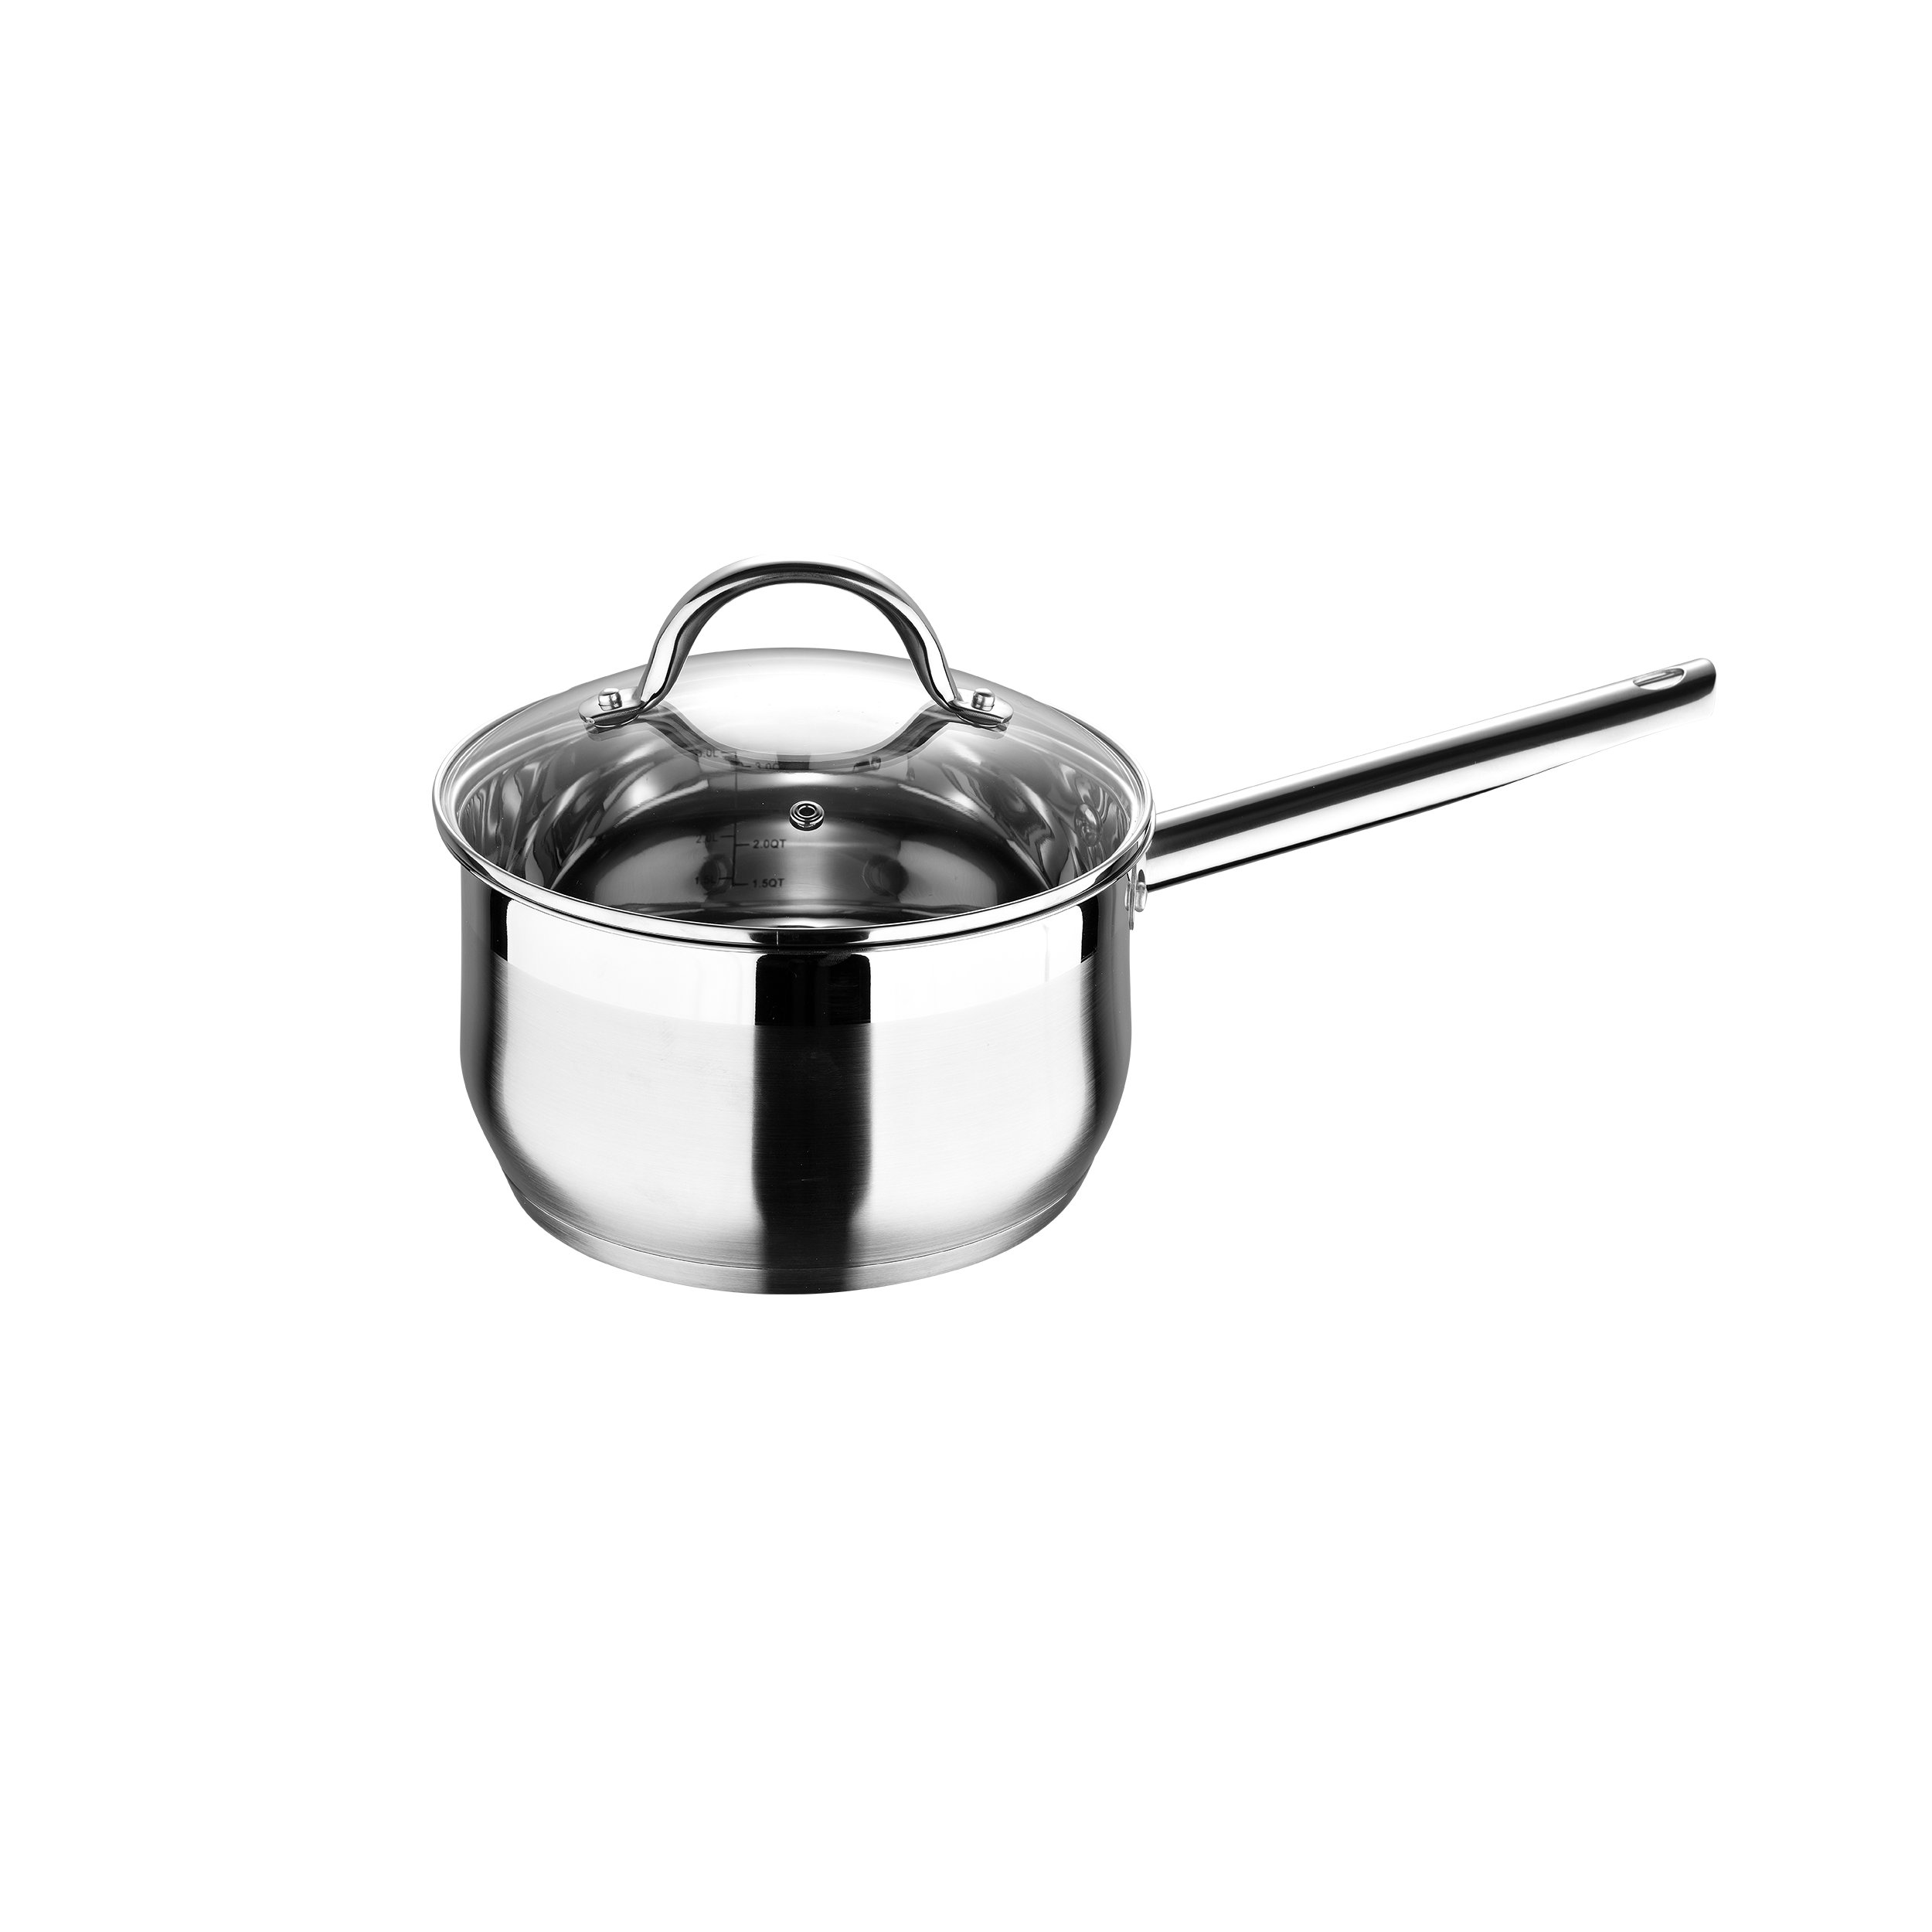 Bergner - Prochef Cookware - Pots and Pans Set Nonstick - Induction  Cookware Suitable for all Stove Types - Dishwasher Safe - 7.3 Quart Covered